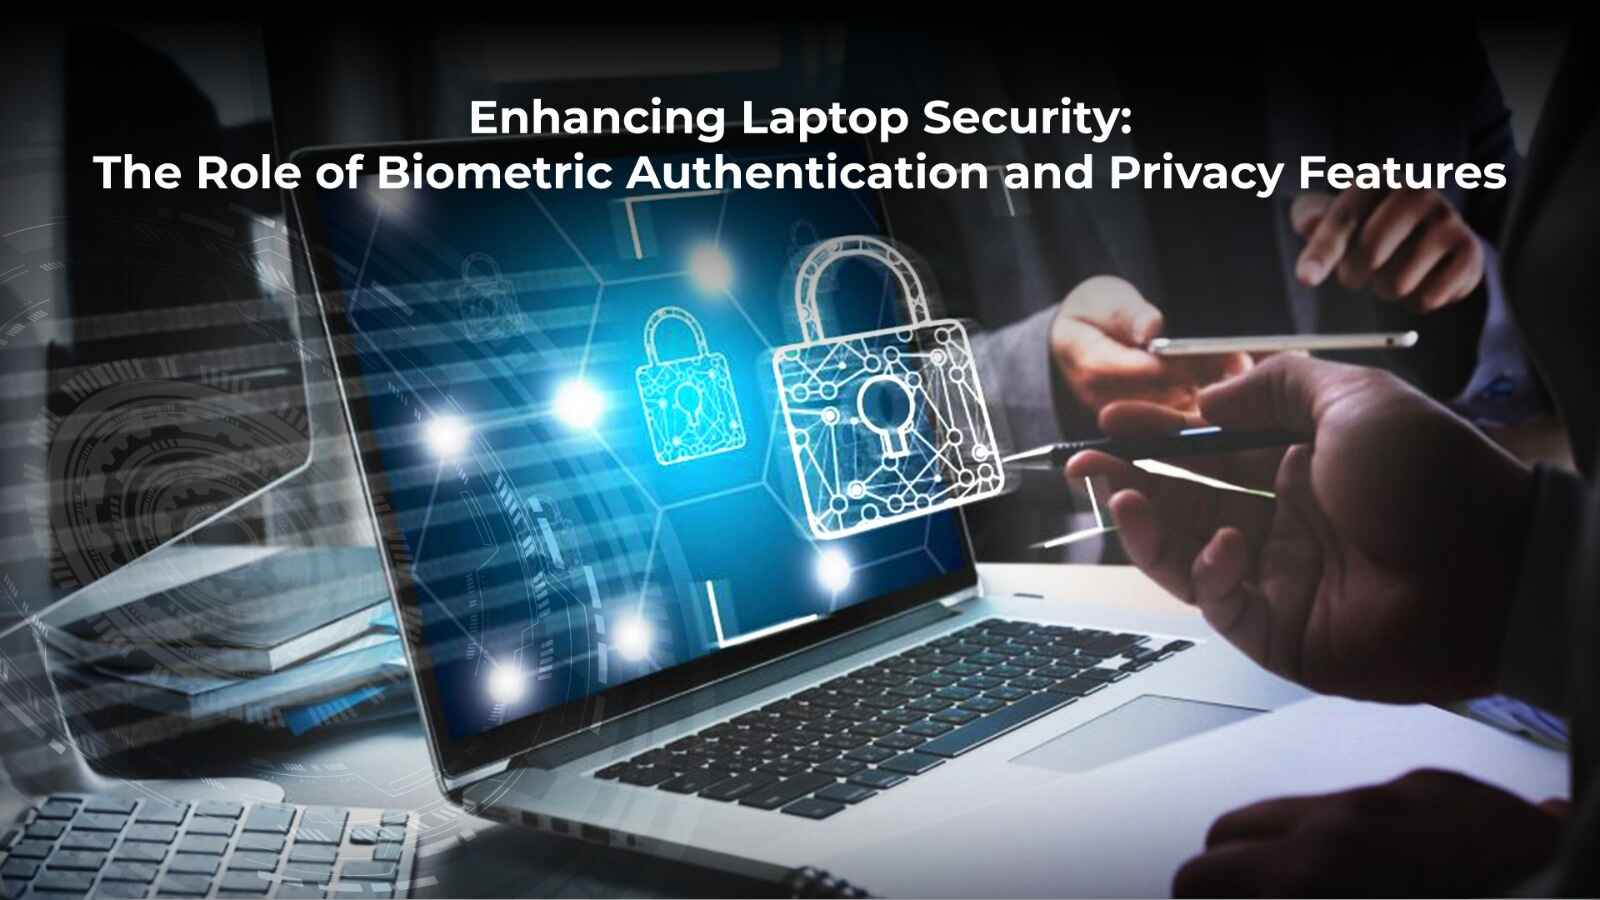 Discover how biometric authentication and privacy features are bolstering laptop security, ensuring your data stays safe and your privacy intact.